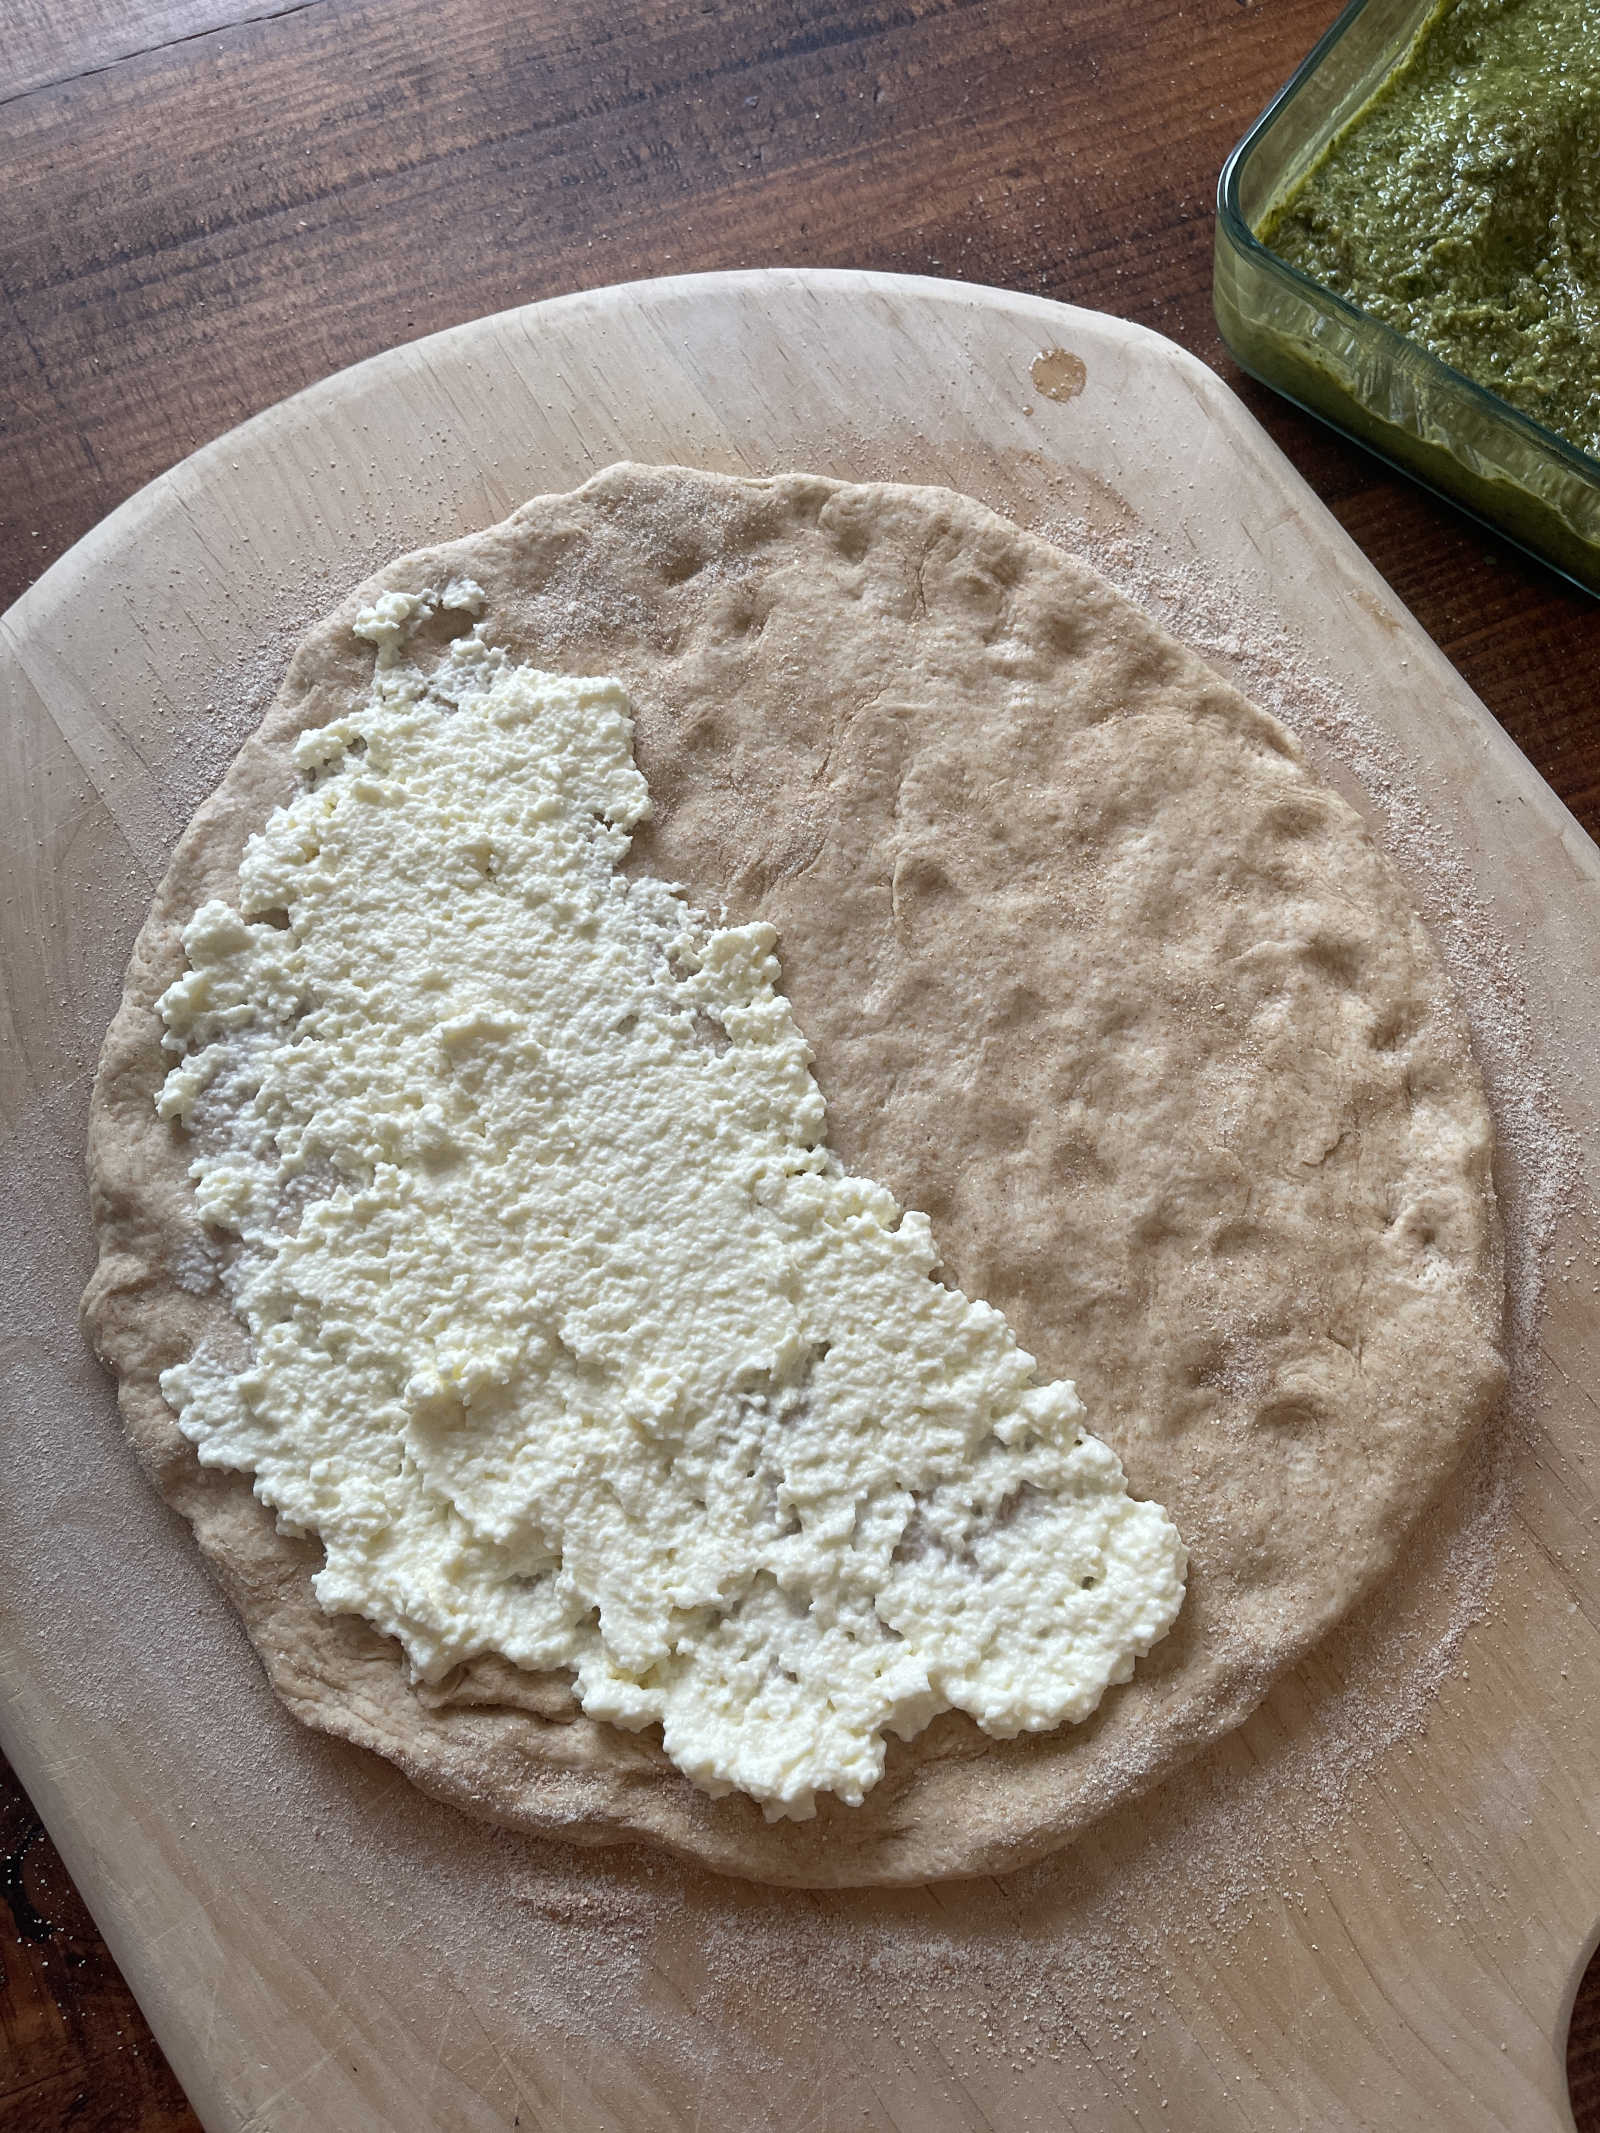 Ricotta cheese spread across half a round of sourdough discard calzone dough. The dough sits on a light colored wooden pizza peel.